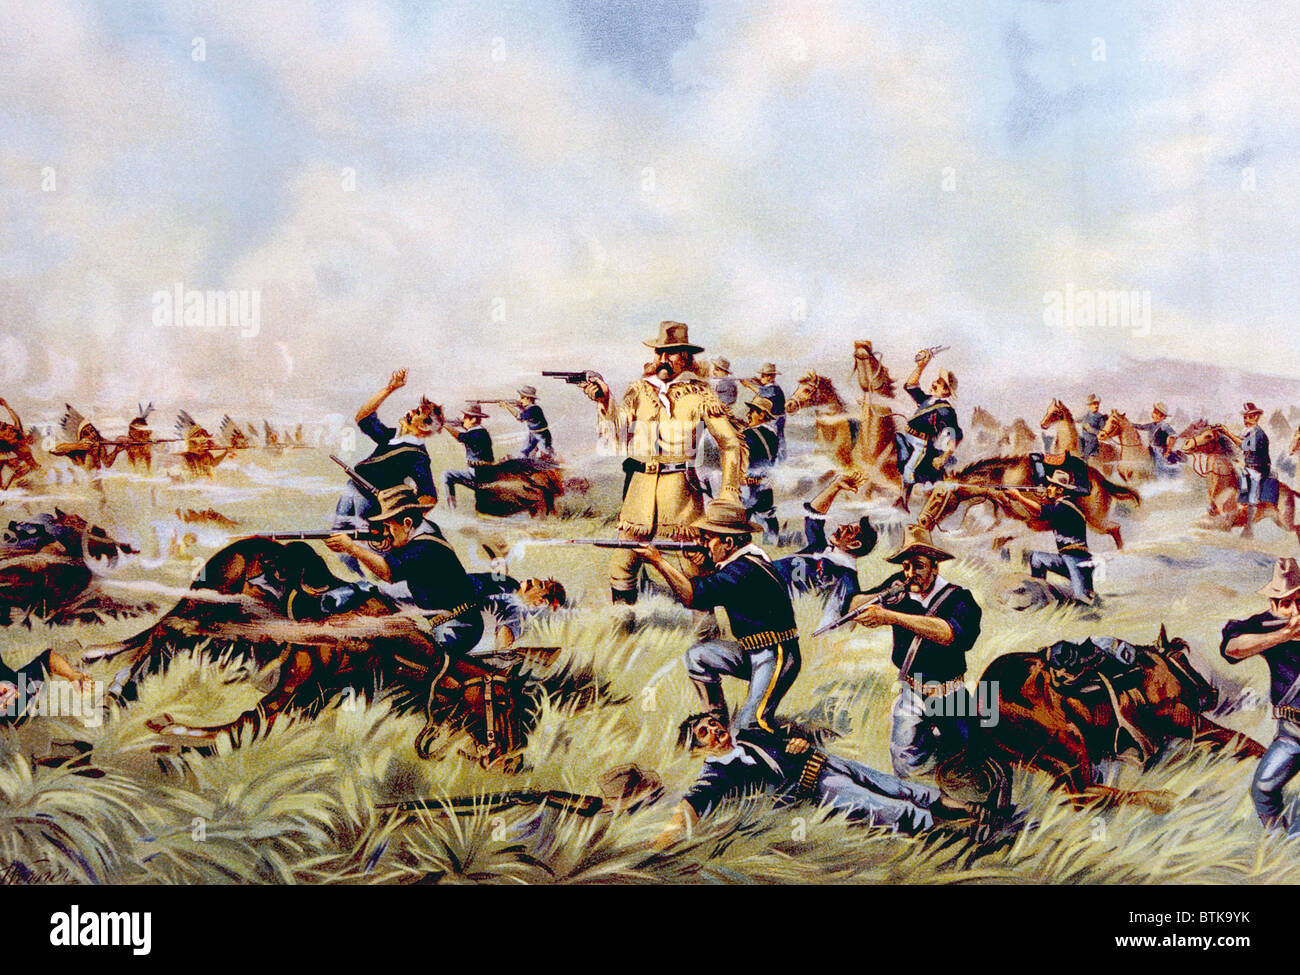 Custer's Last Stand, General George Armstrong Custer at the Battle of Little Bighorn, 1876, lithograph published 1899 Stock Photo